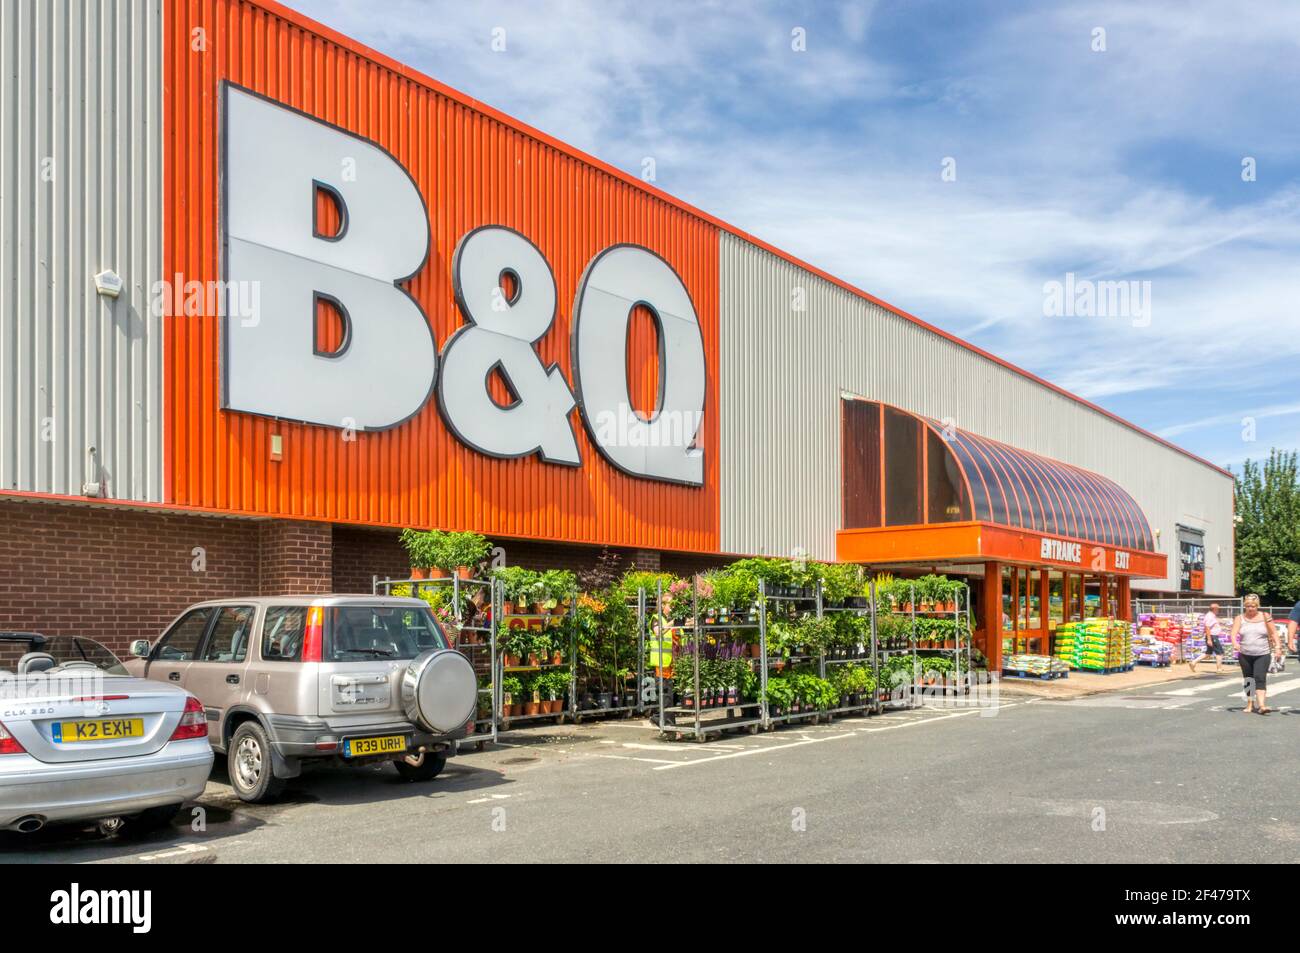 A large B&Q DIY store and garden centre Stock Photo - Alamy